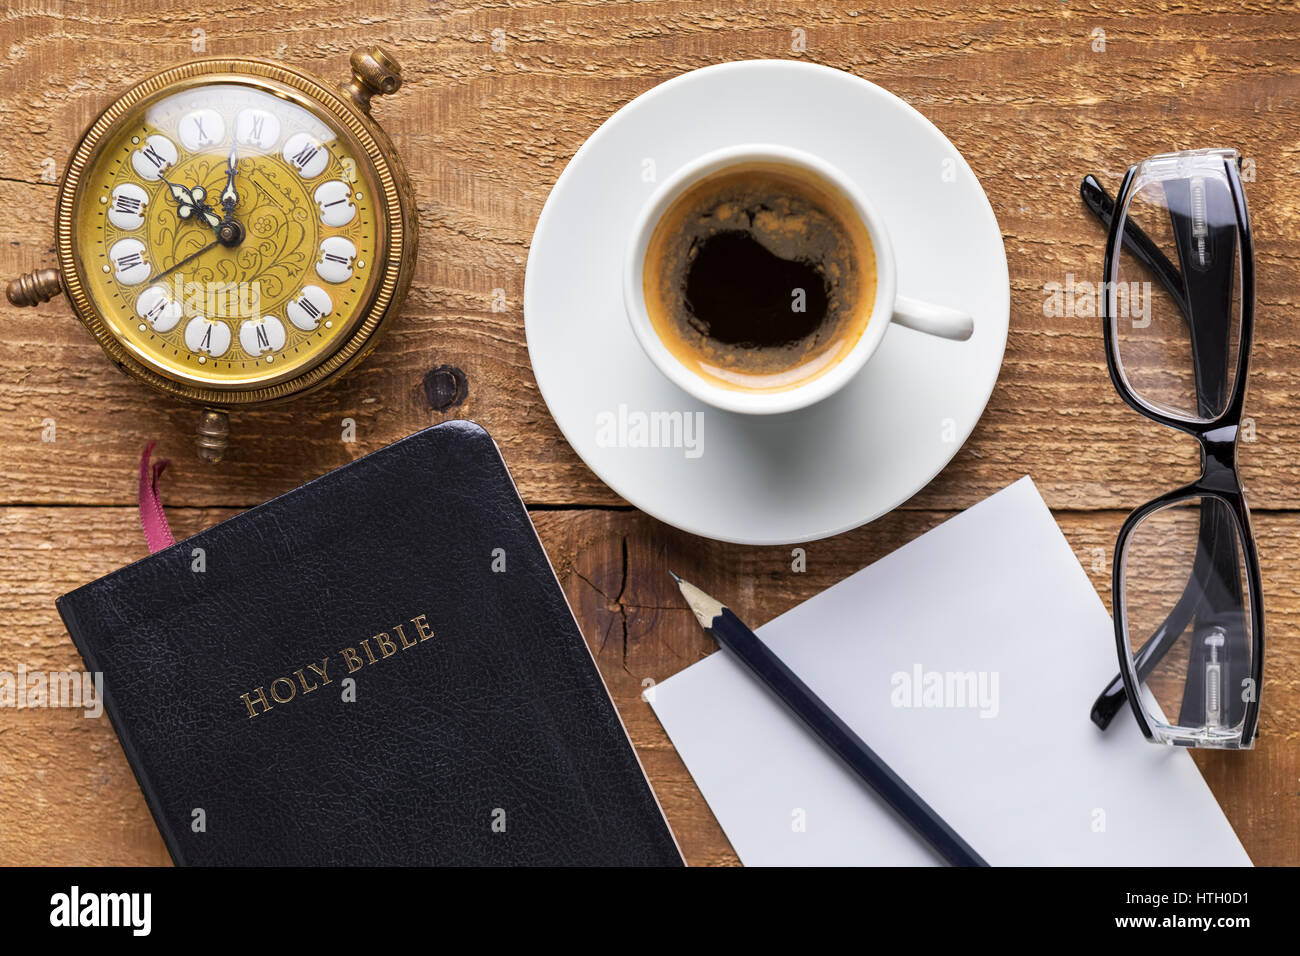 Holy Bible, alarm clock, glasses and coffee on wood table. Studying  the Bible concept. Focus on the Bible Stock Photo